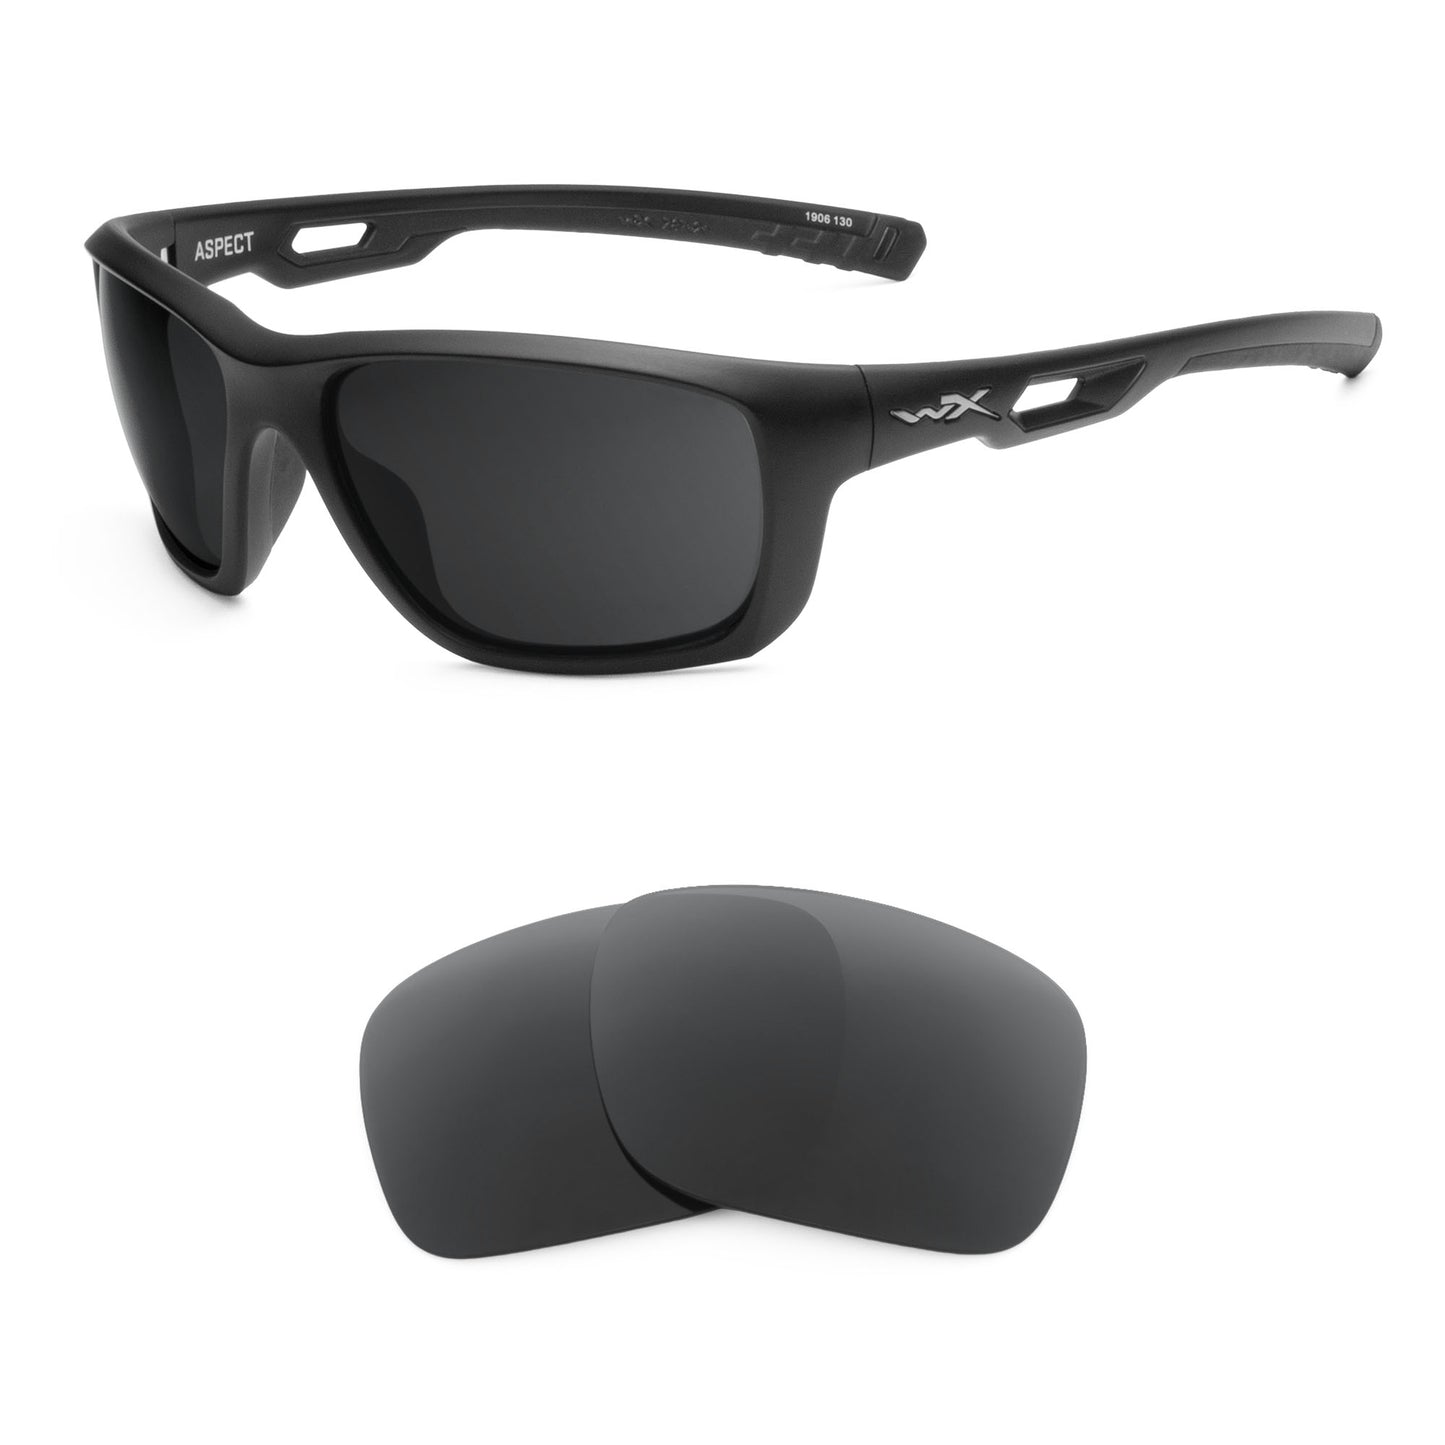 Wiley X Aspect sunglasses with replacement lenses